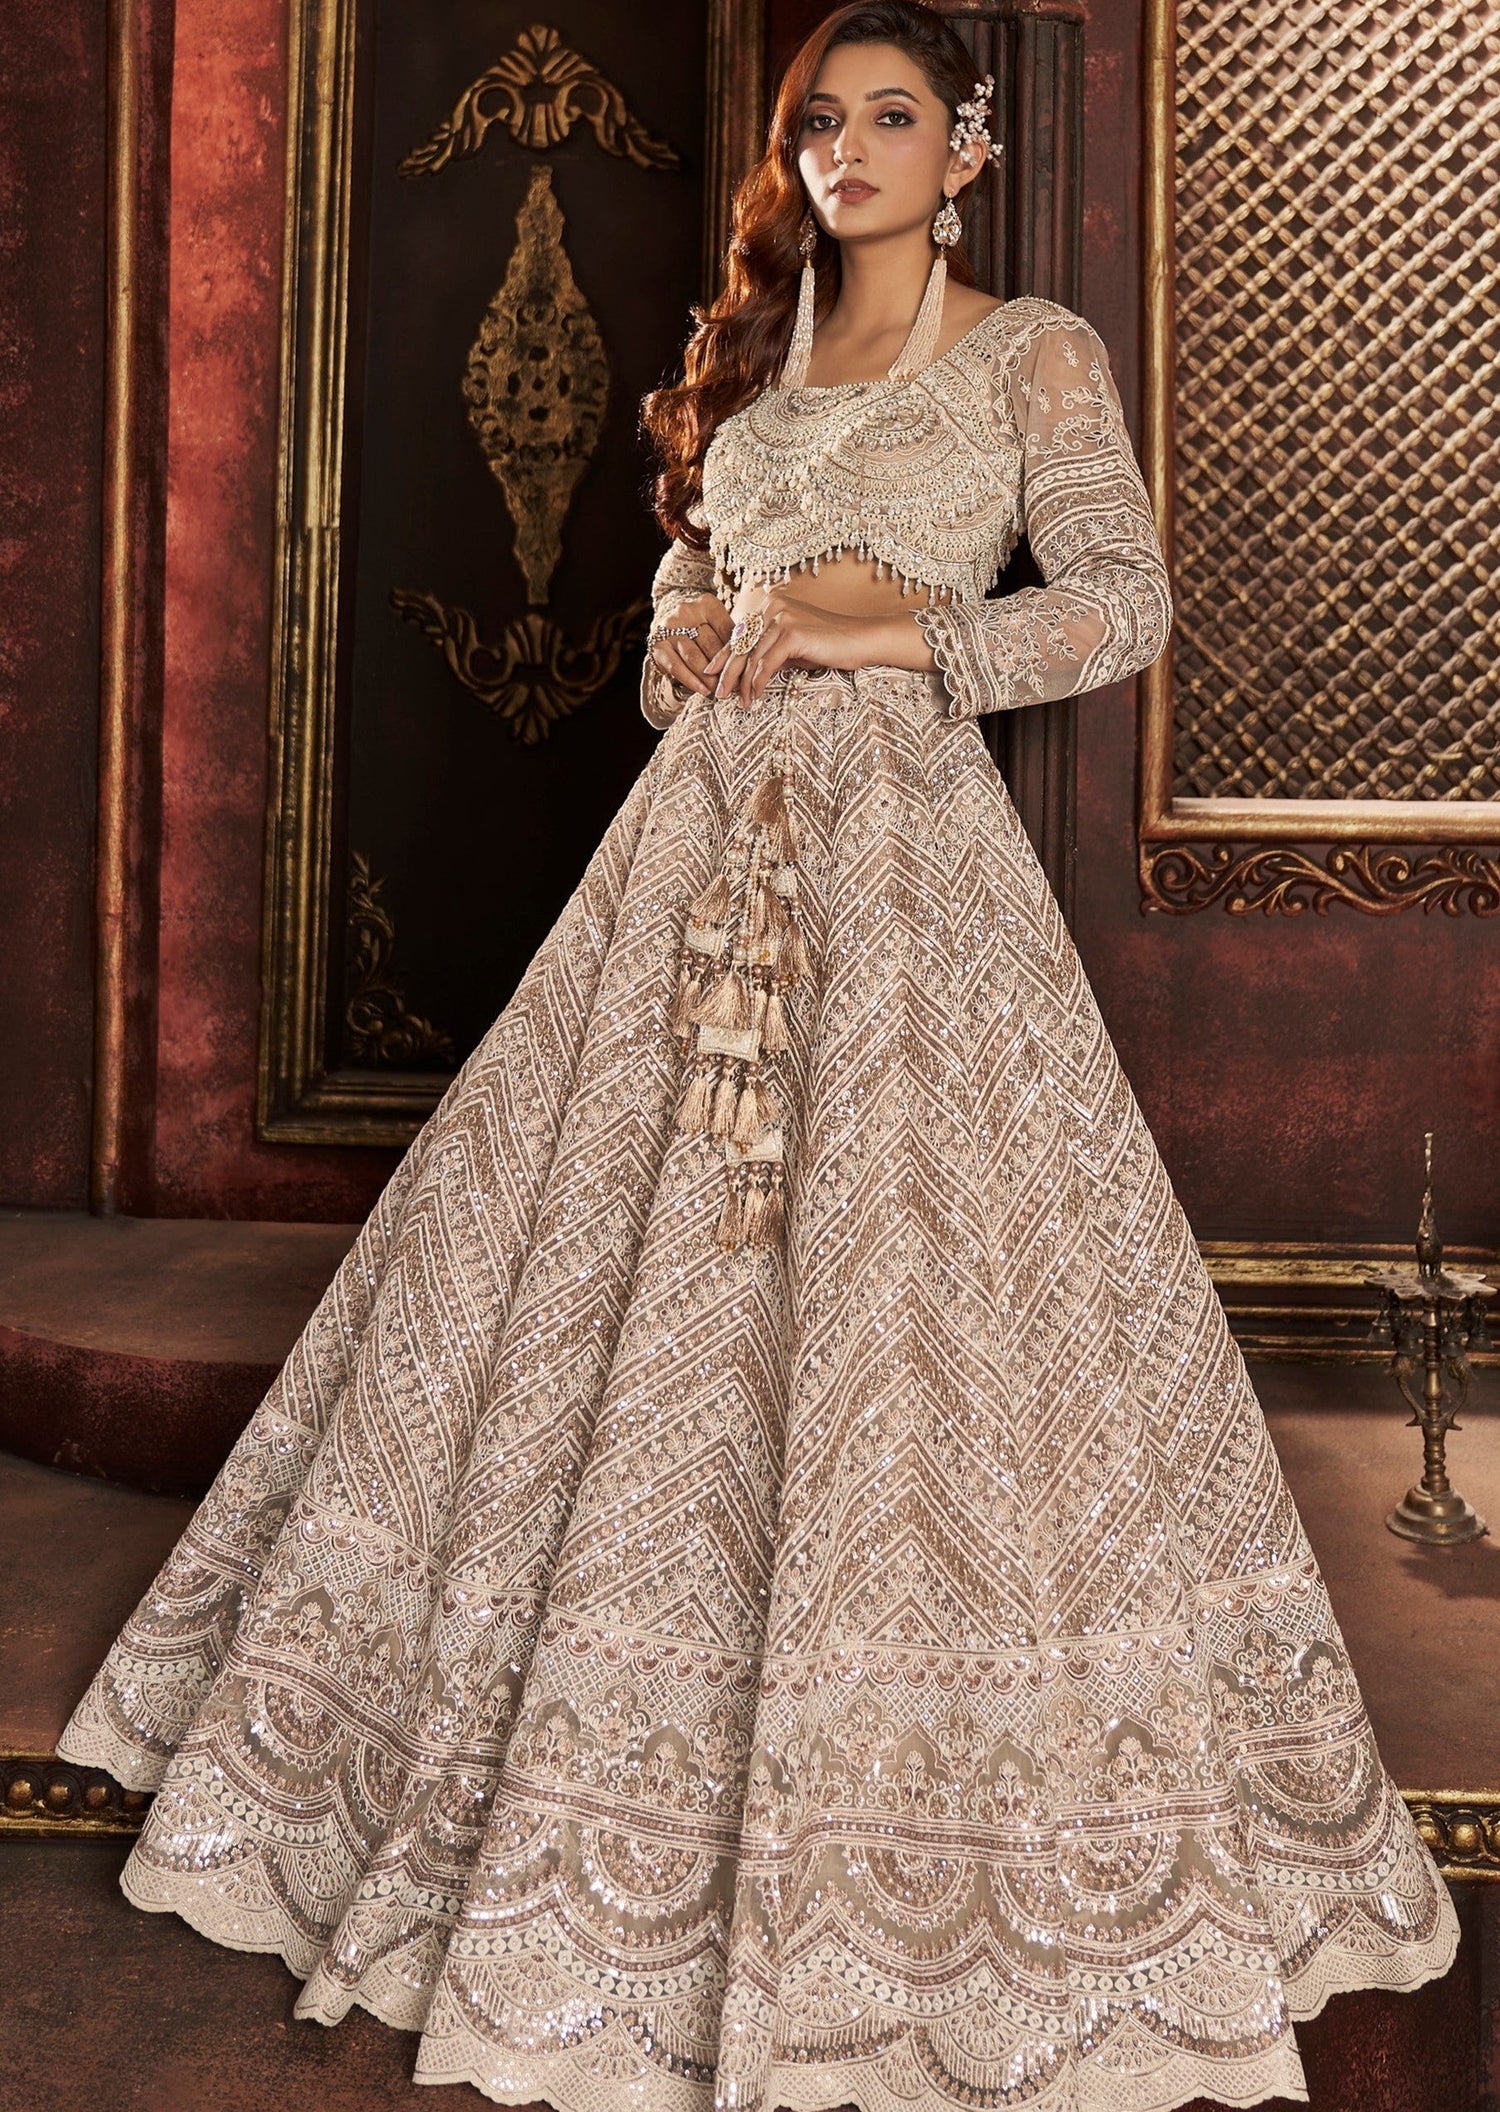 How Much Does A Sabyasachi Lehenga Cost? – Site Title